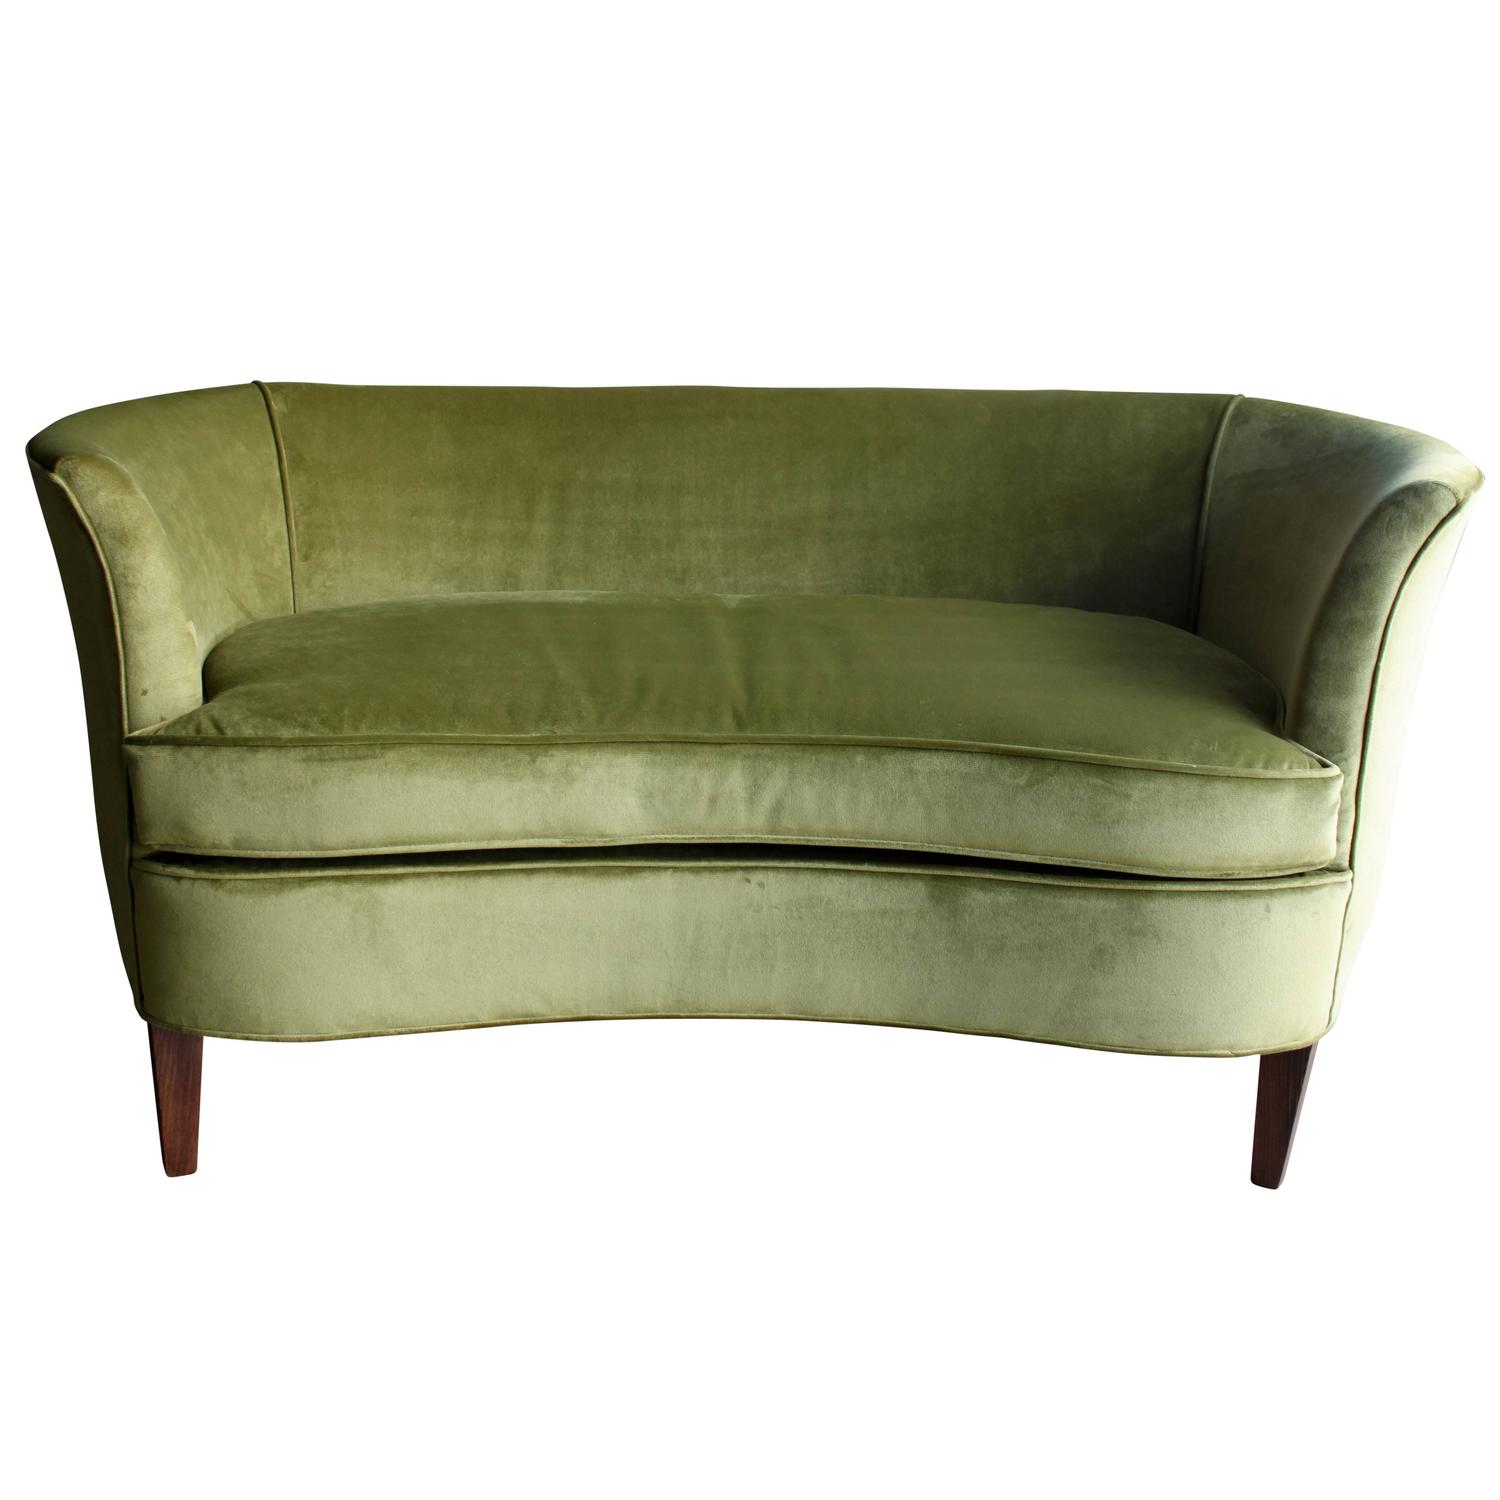 Sculptural 1960s Midcentury Green Velvet Settee At 1stdibs intended for loveseats from 1960s pertaining to Your own home